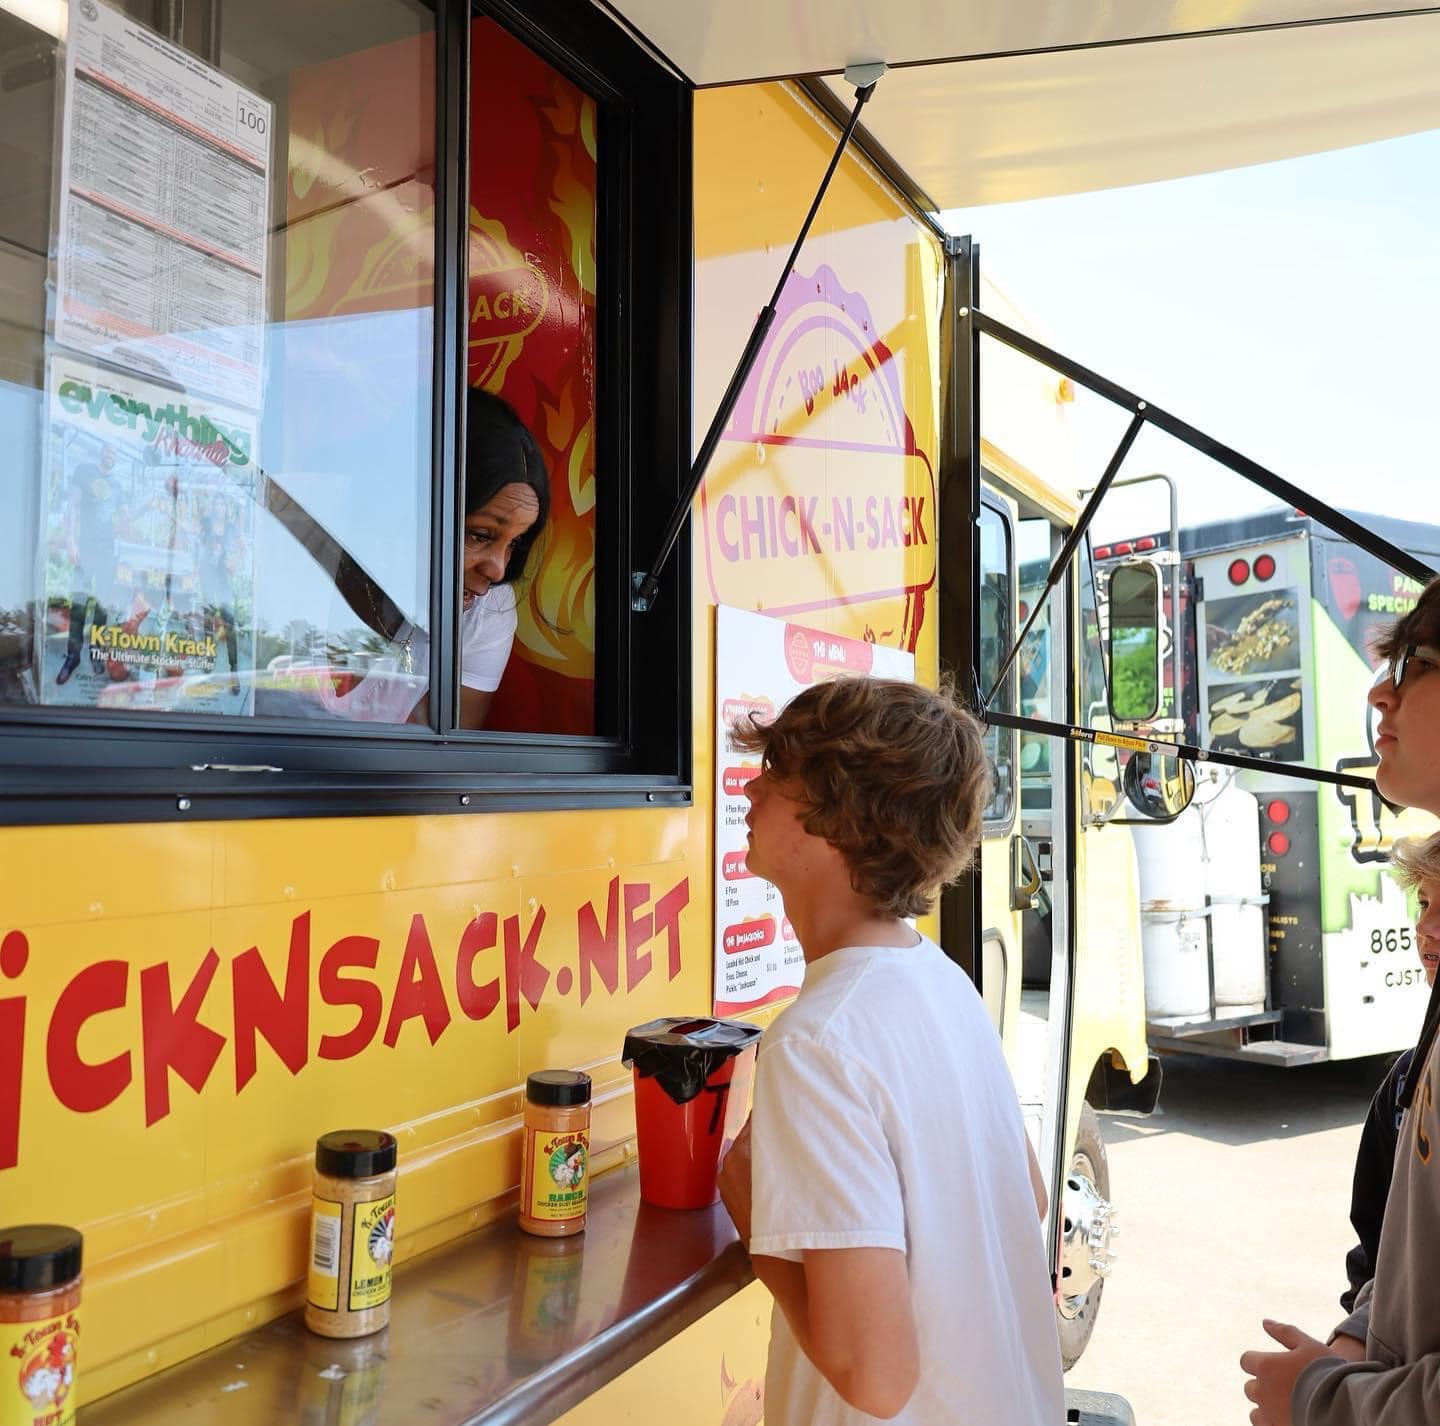 Tasty Tuesday's Food Truck Rally in Downtown Clinton